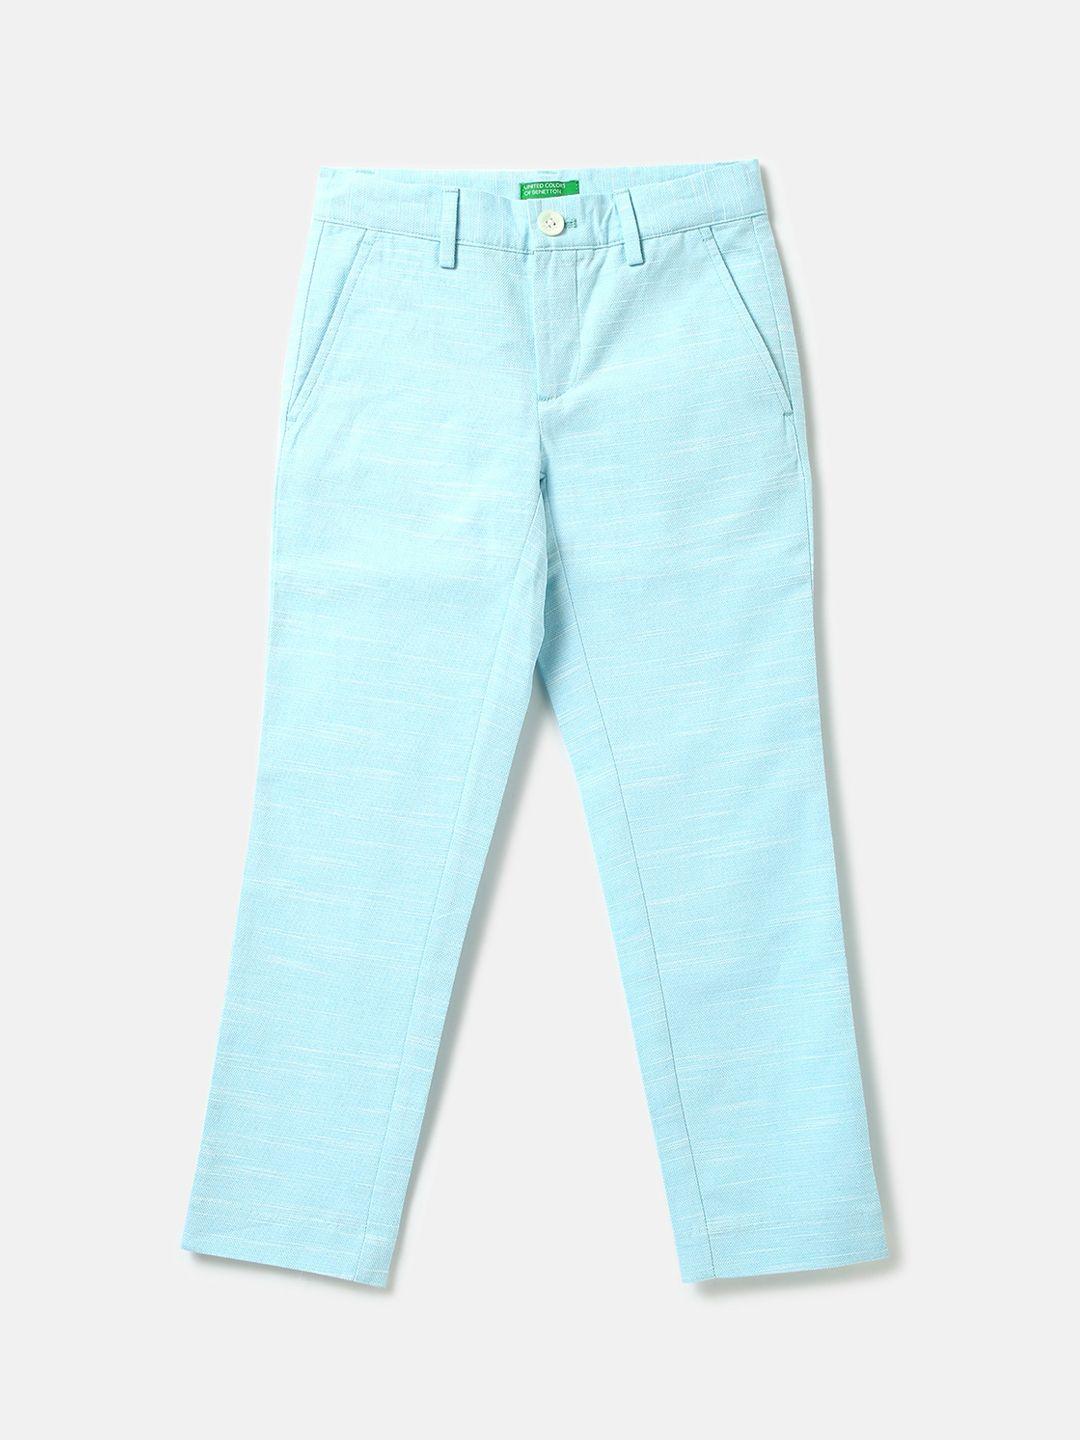 united-colors-of-benetton-kids-boys-cotton-mid-rise-regular-fit-trousers